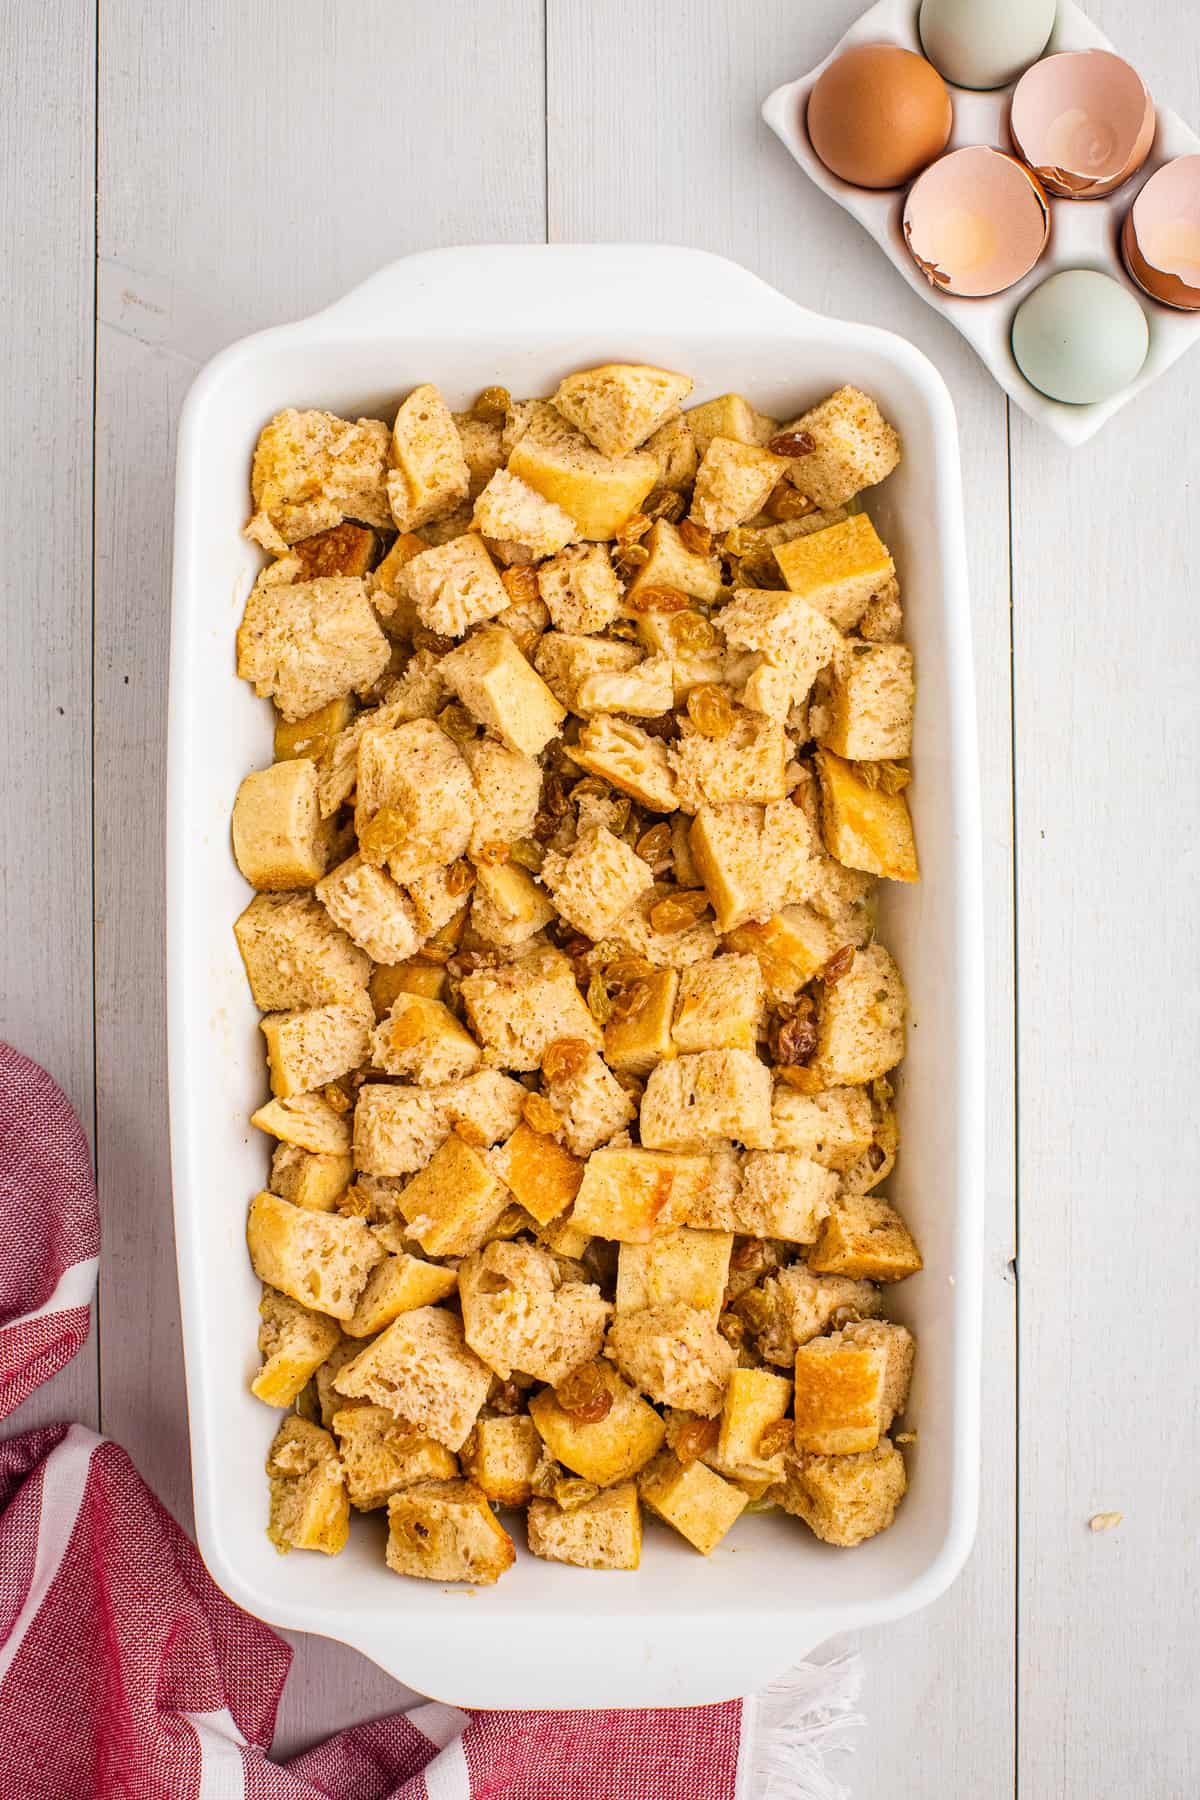 Overhead image of bread pudding in casserole dish before baking